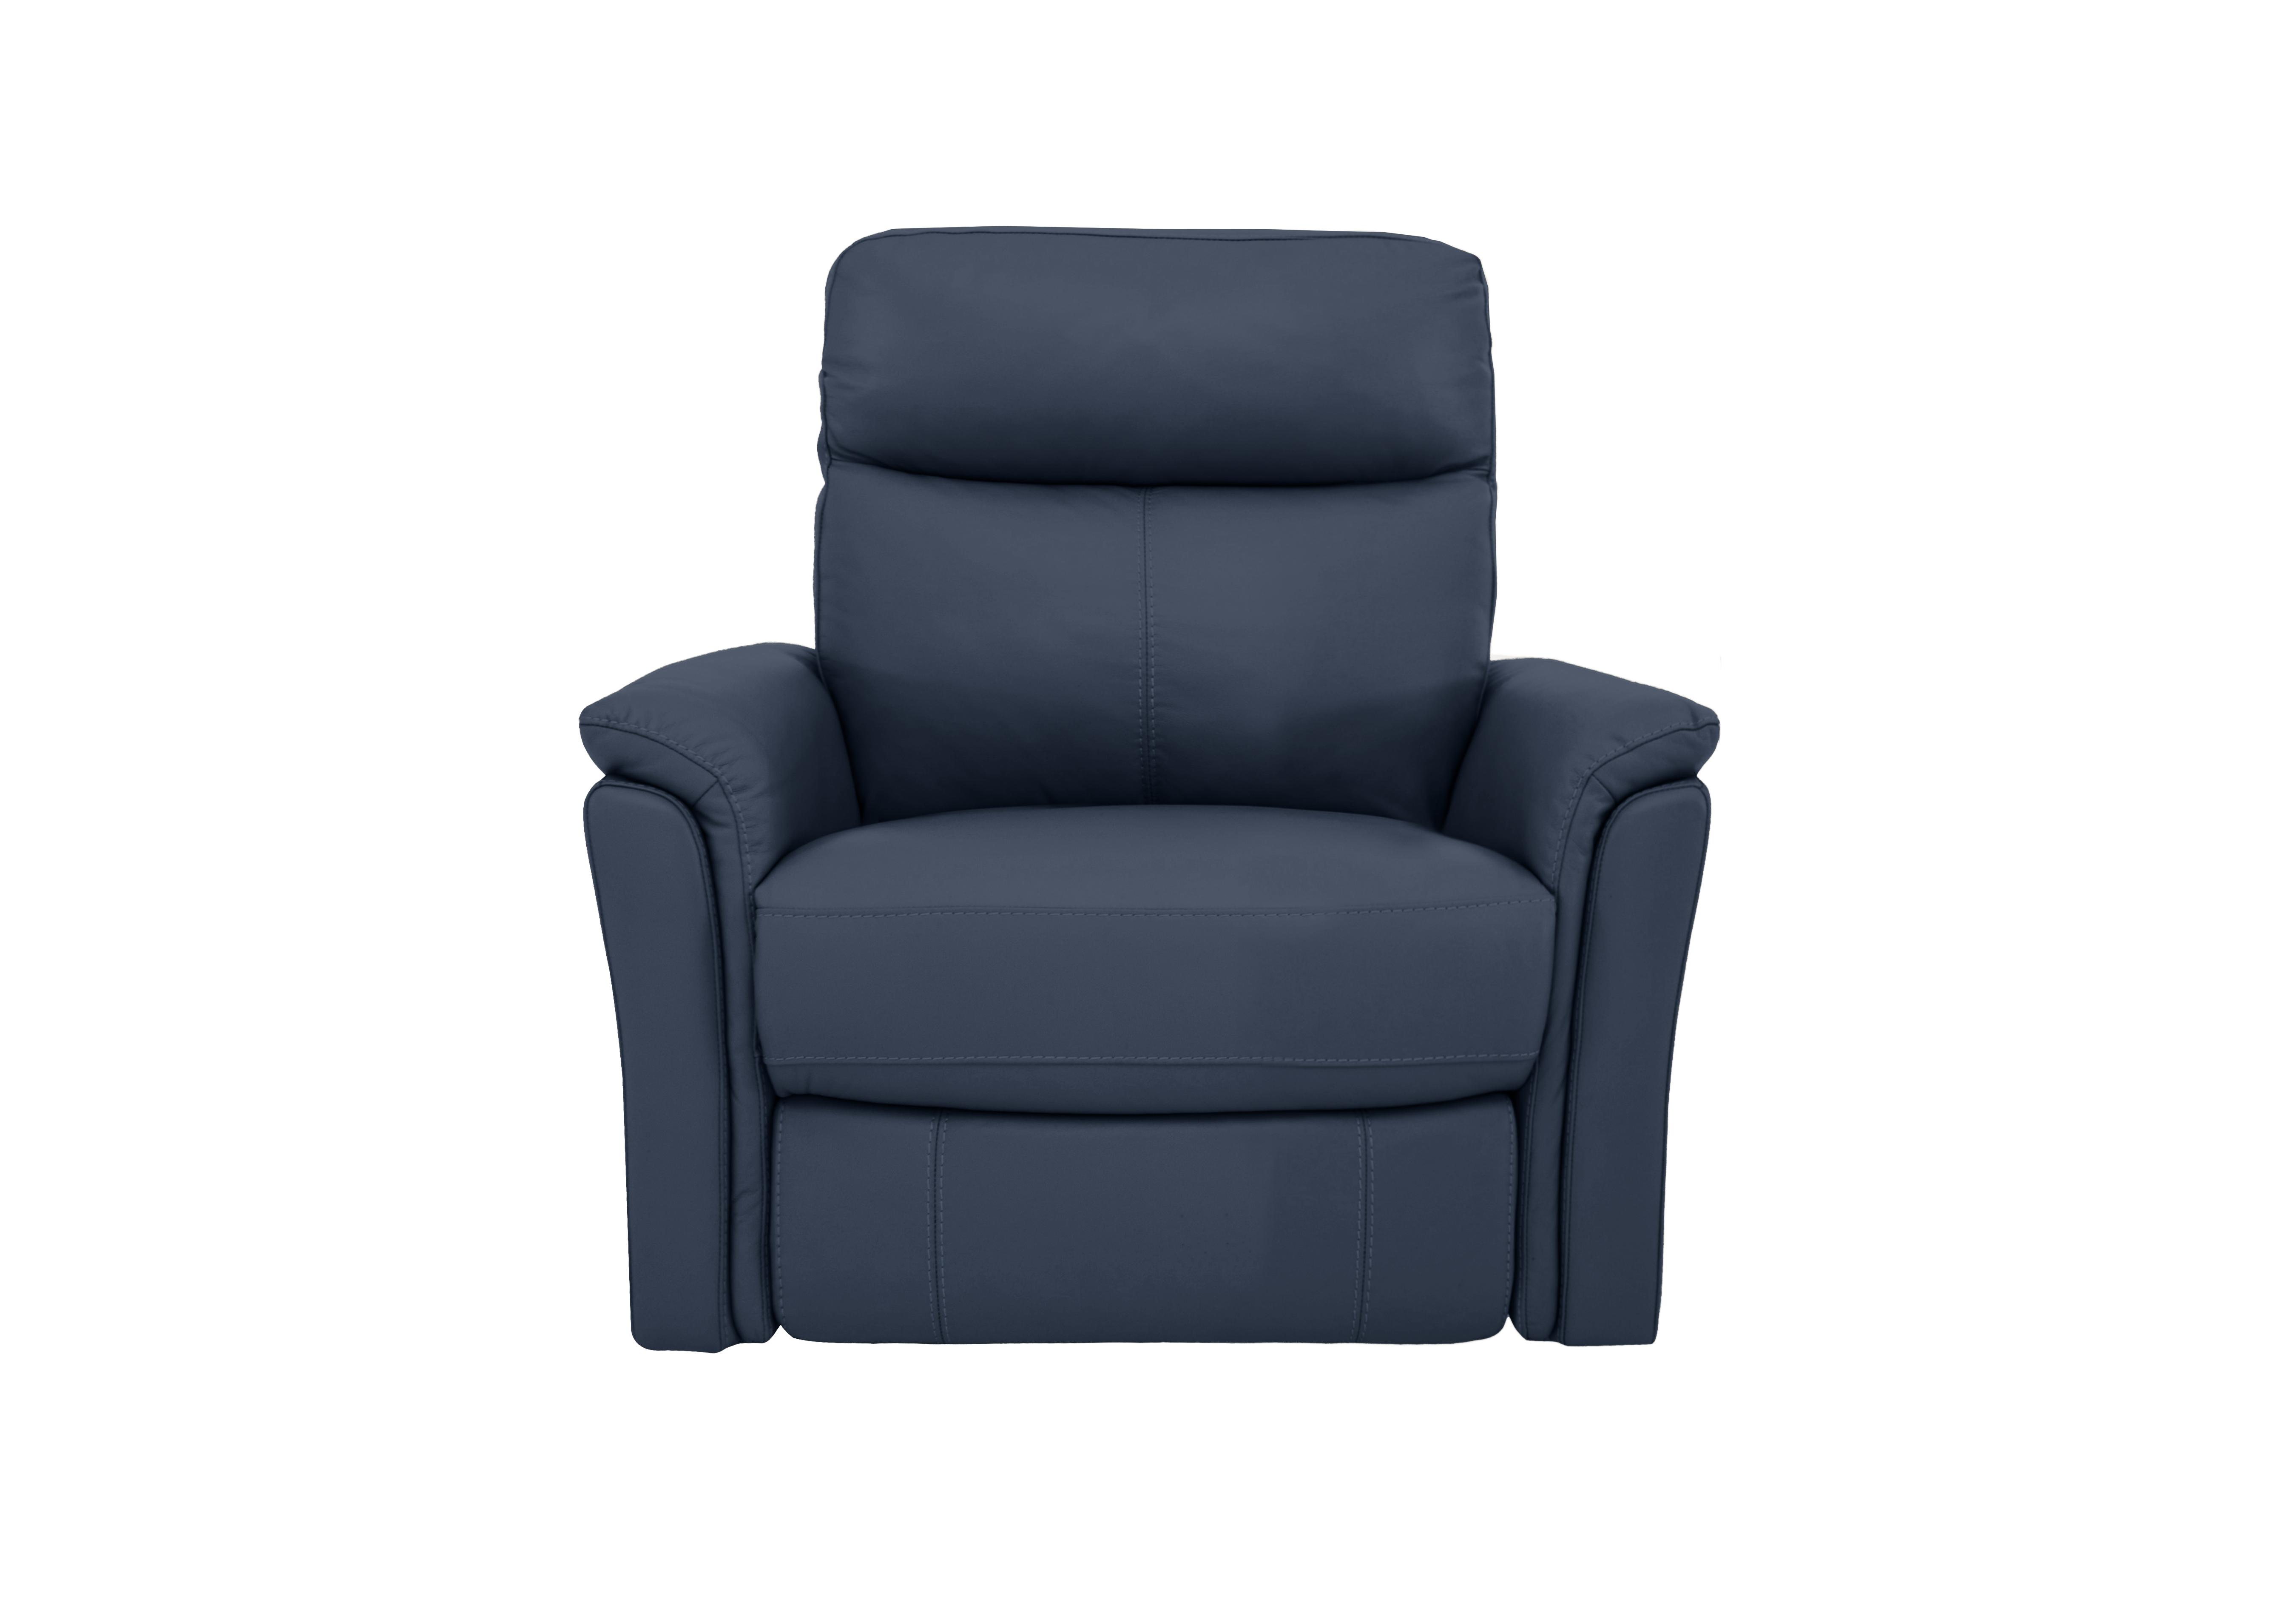 Compact Collection Piccolo Recliner Armchair in Bv-313e Ocean Blue on Furniture Village